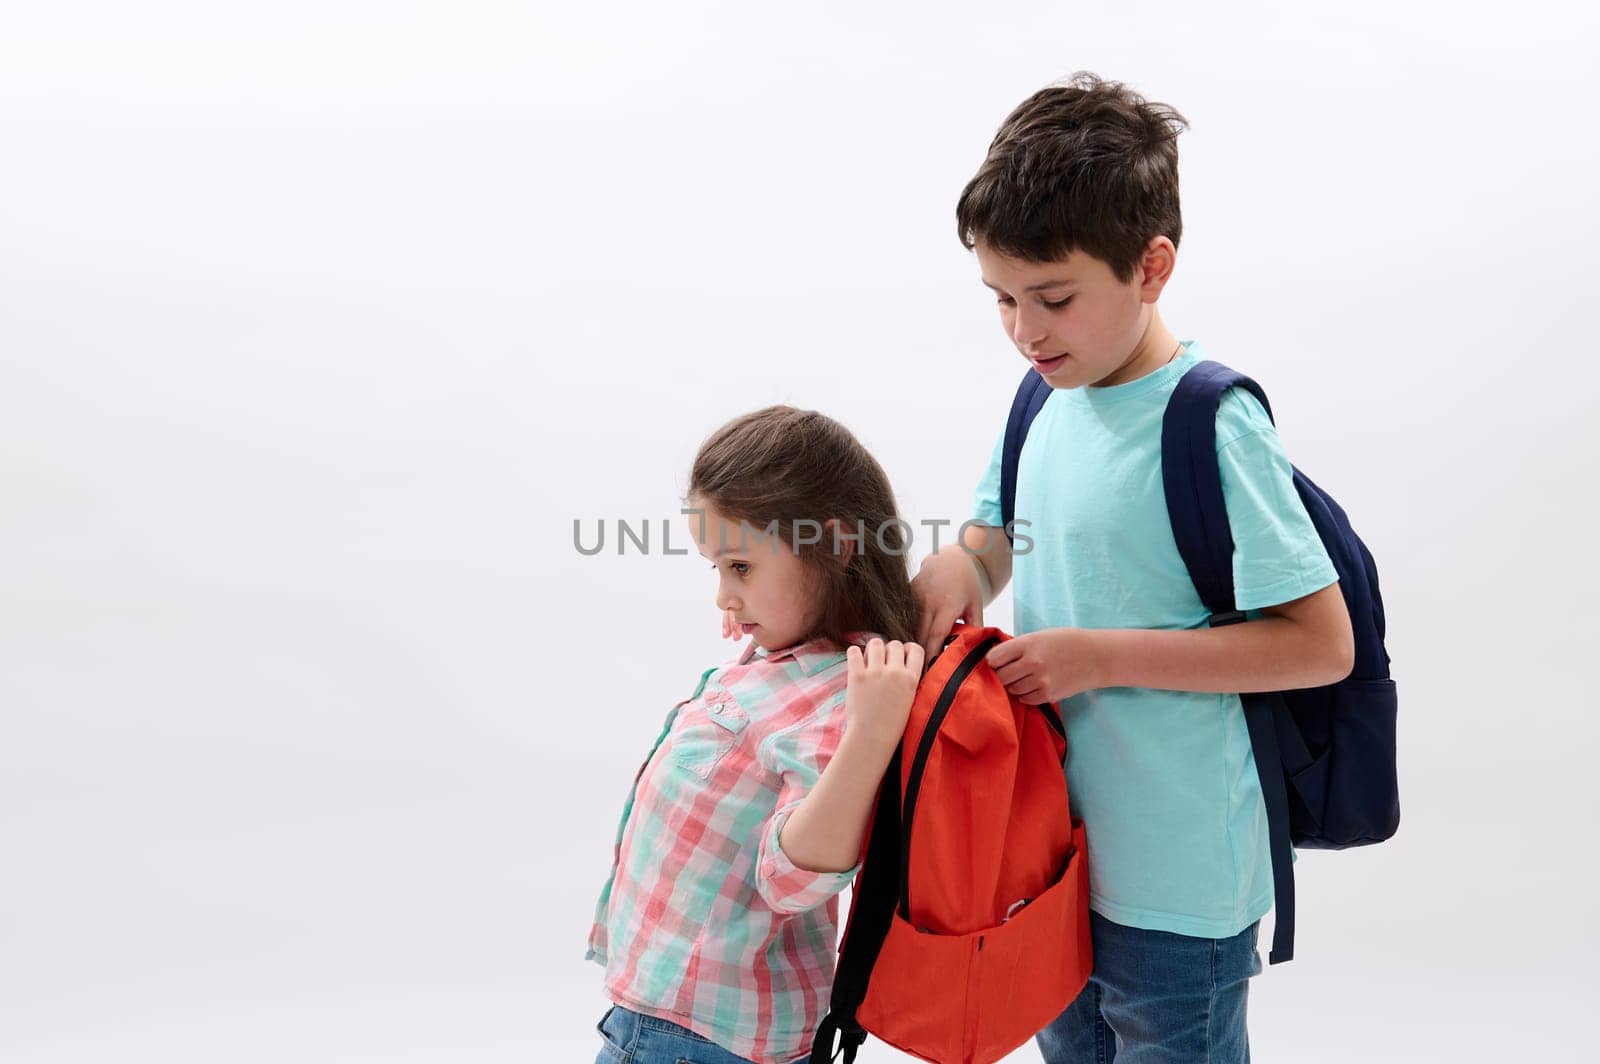 Caring teen boy older brother helps his younger sister to put on a backpack on back, isolated on white studio background by artgf